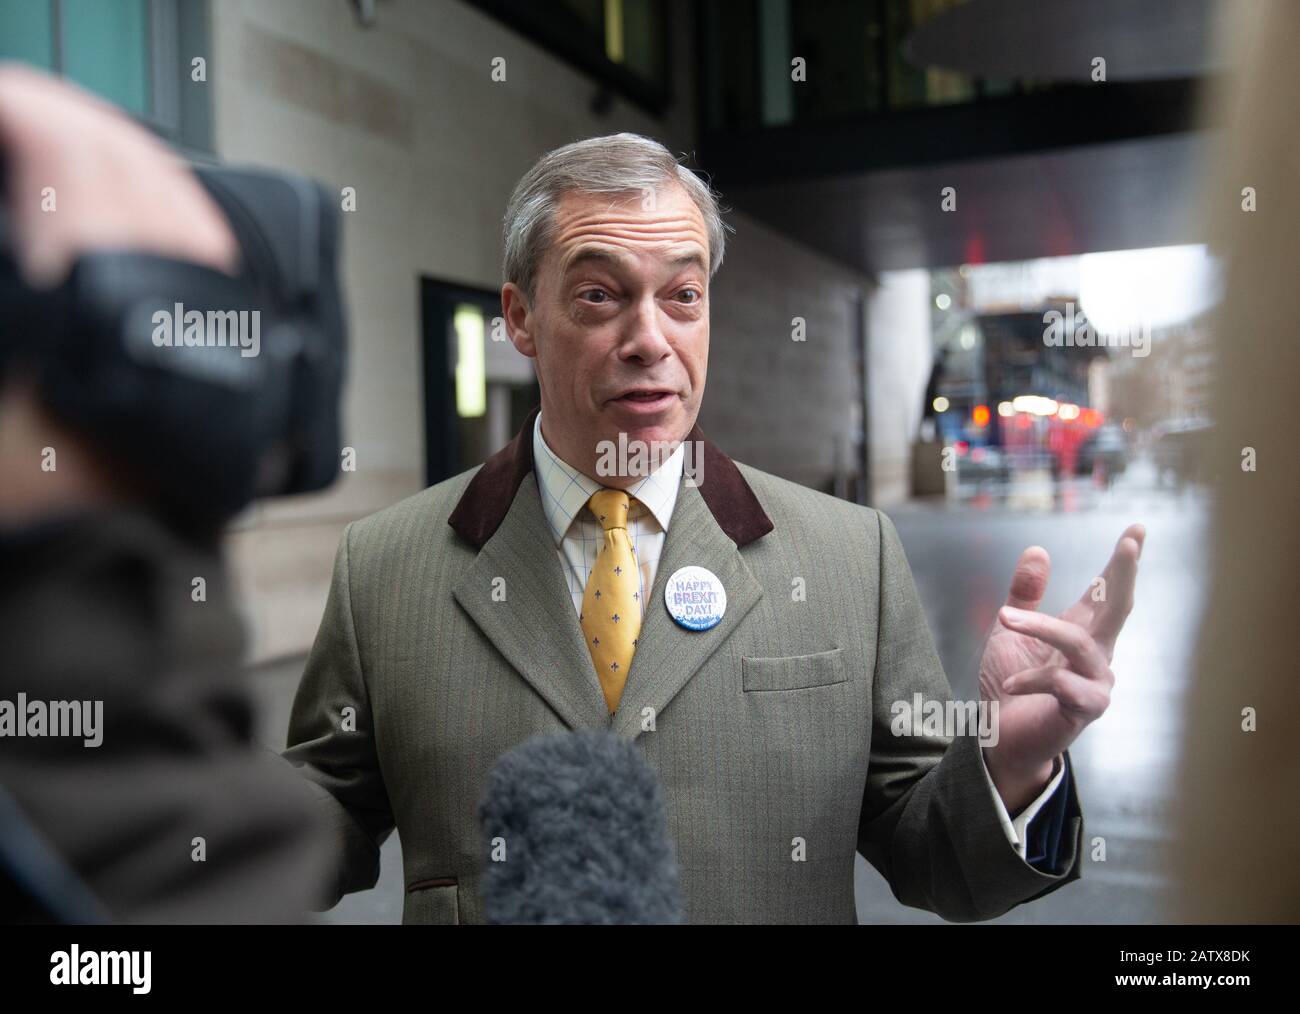 Brexit Party Leader, Nigel Farage, arrives at the BBC Studios holding the commemorative 50p coin, dated 31 Jan 2020 to mark Britain's exit from the EU. Stock Photo